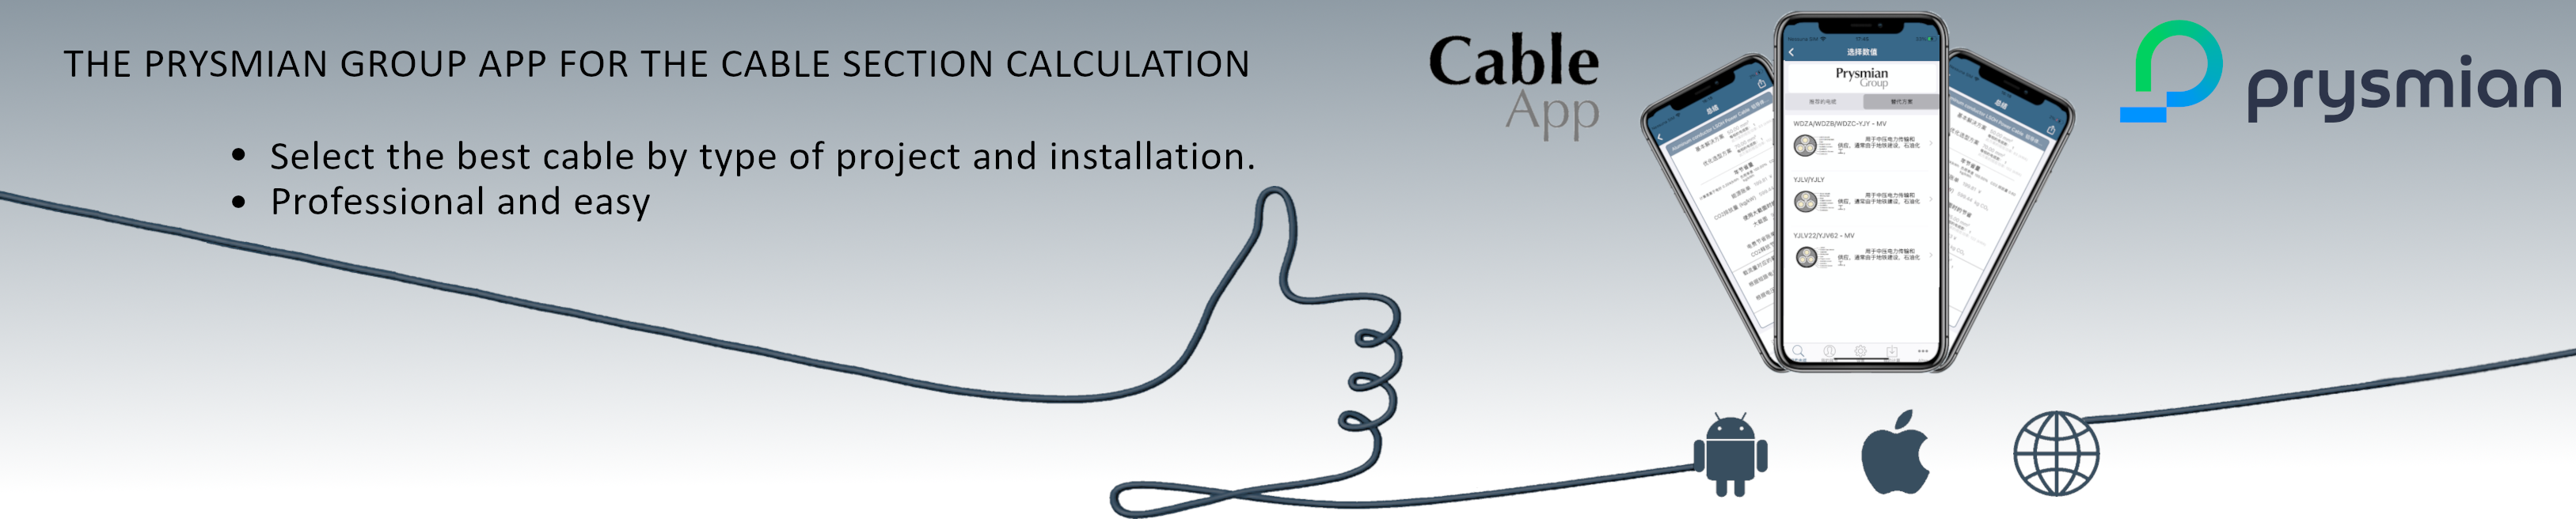 cableapp application for the calculation of cable section